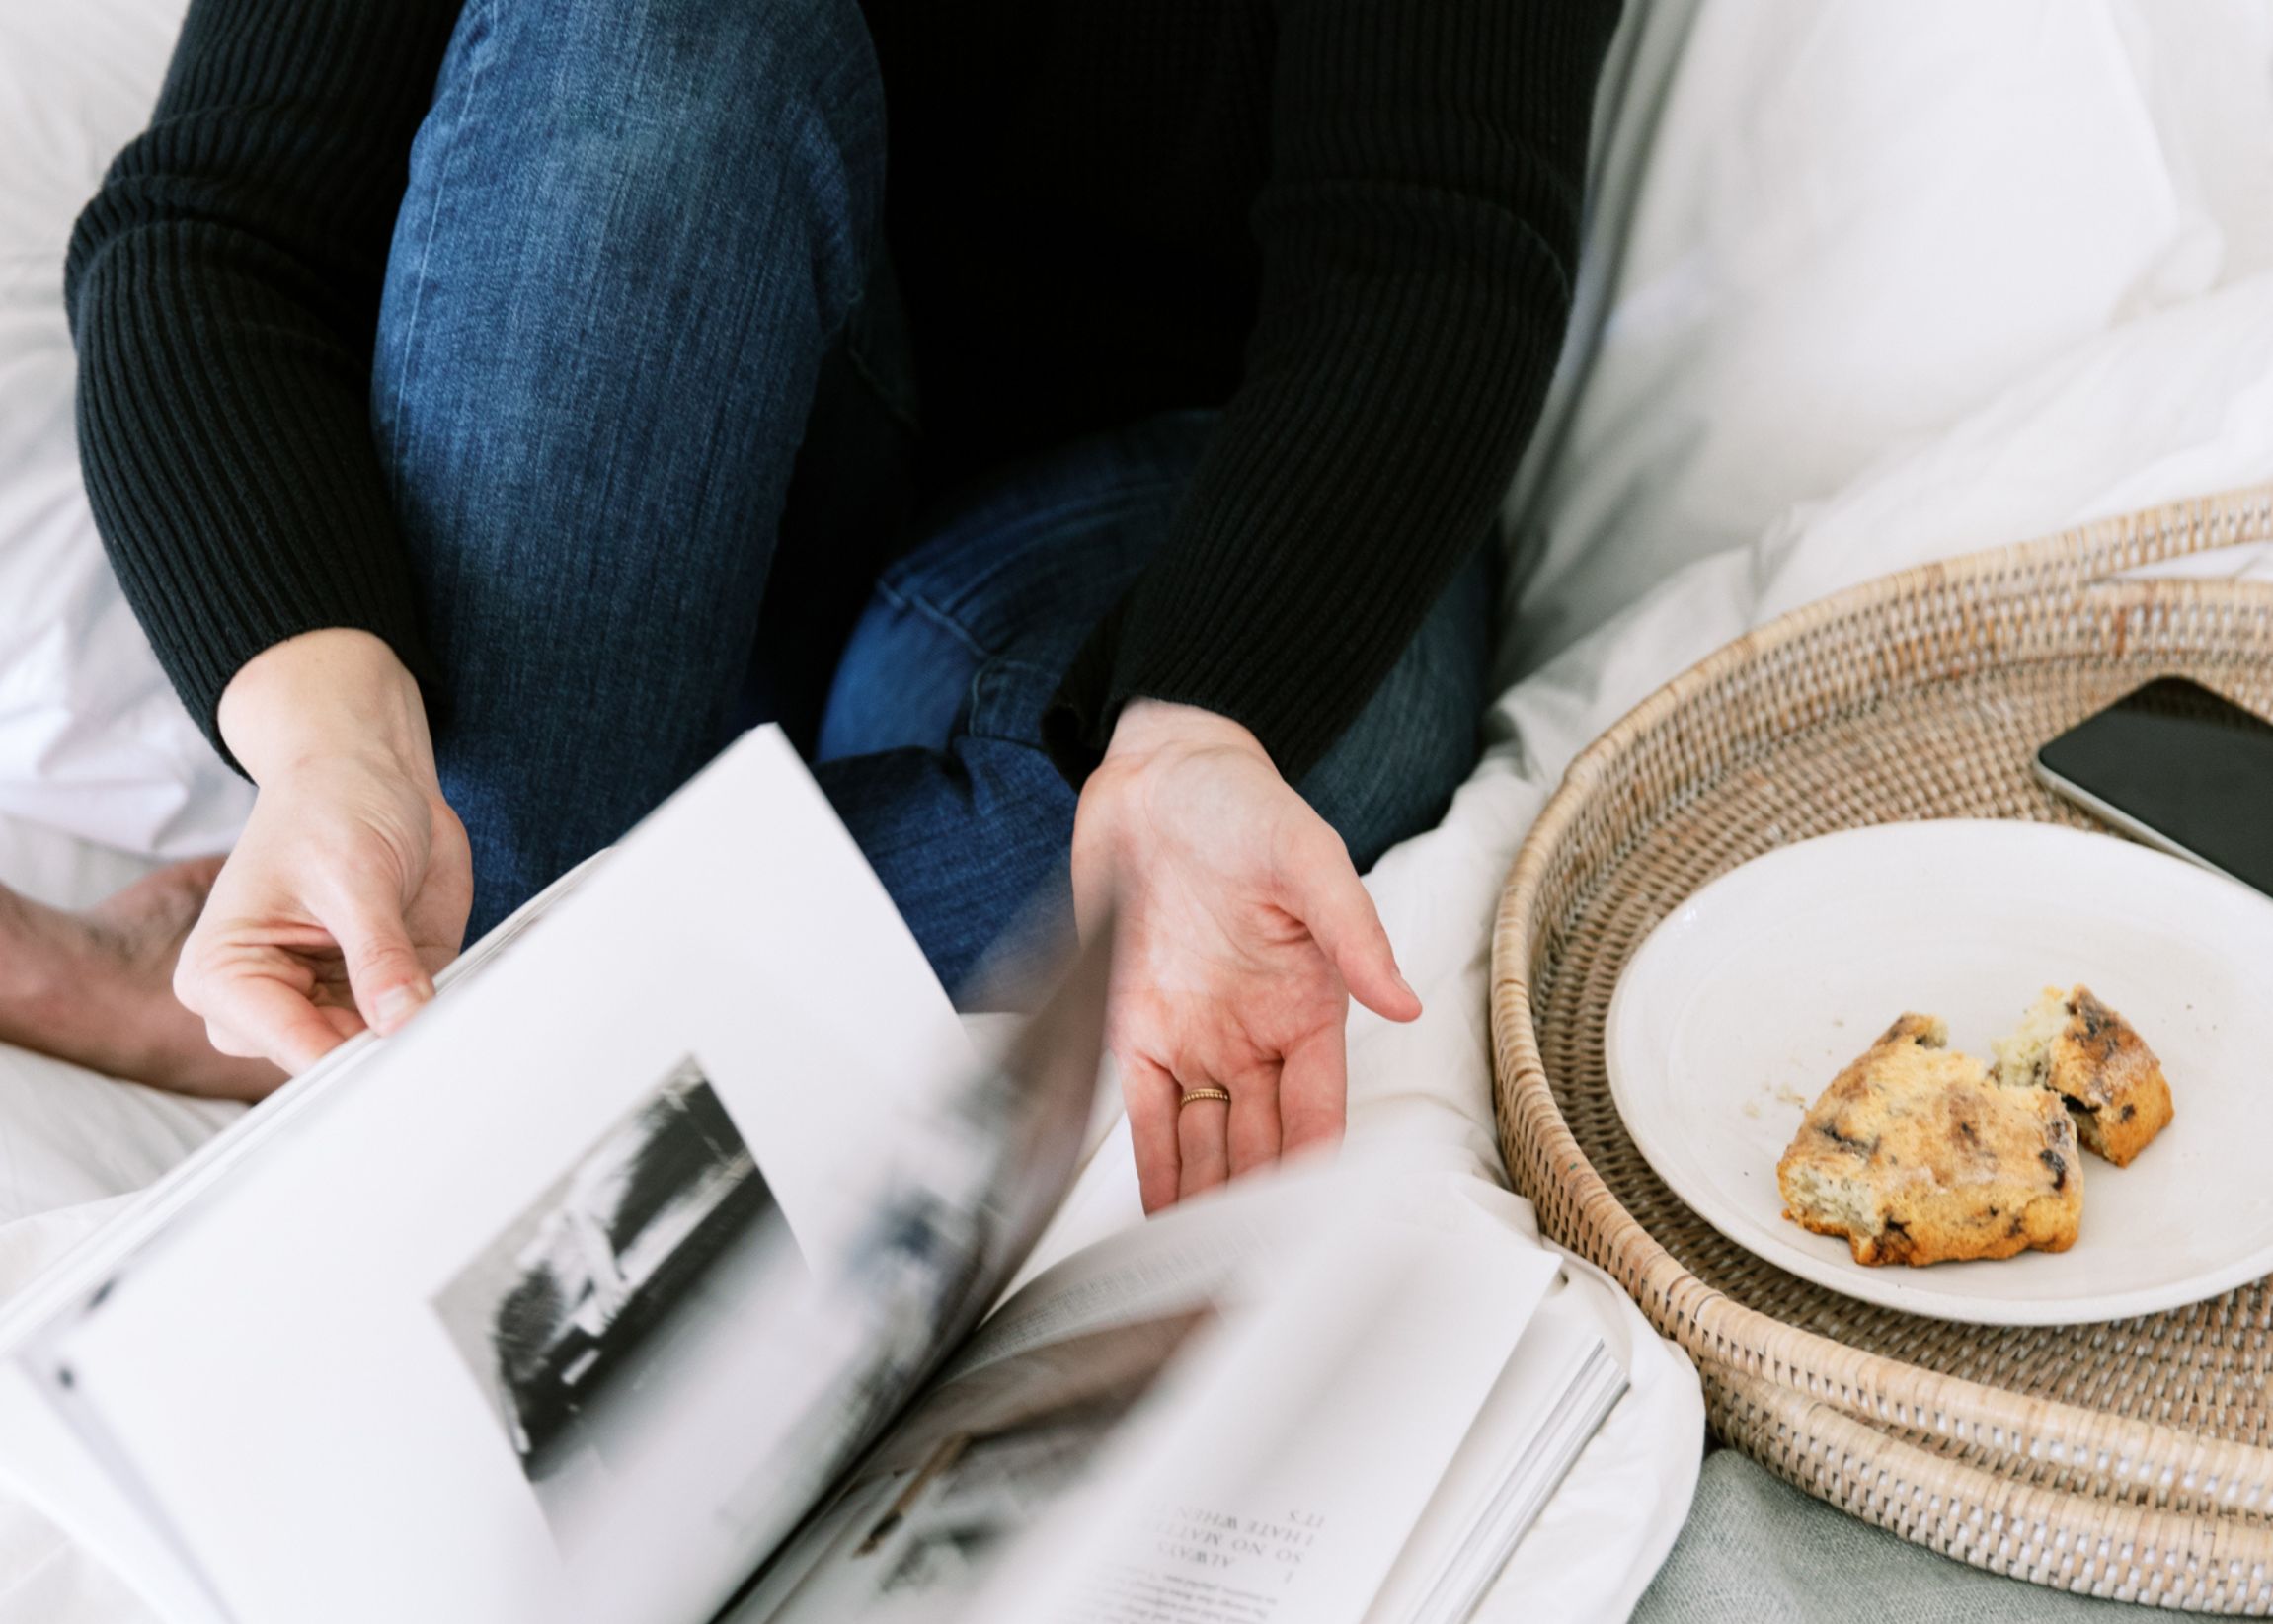 Woman flipping through magazine, on bed, with breakfast